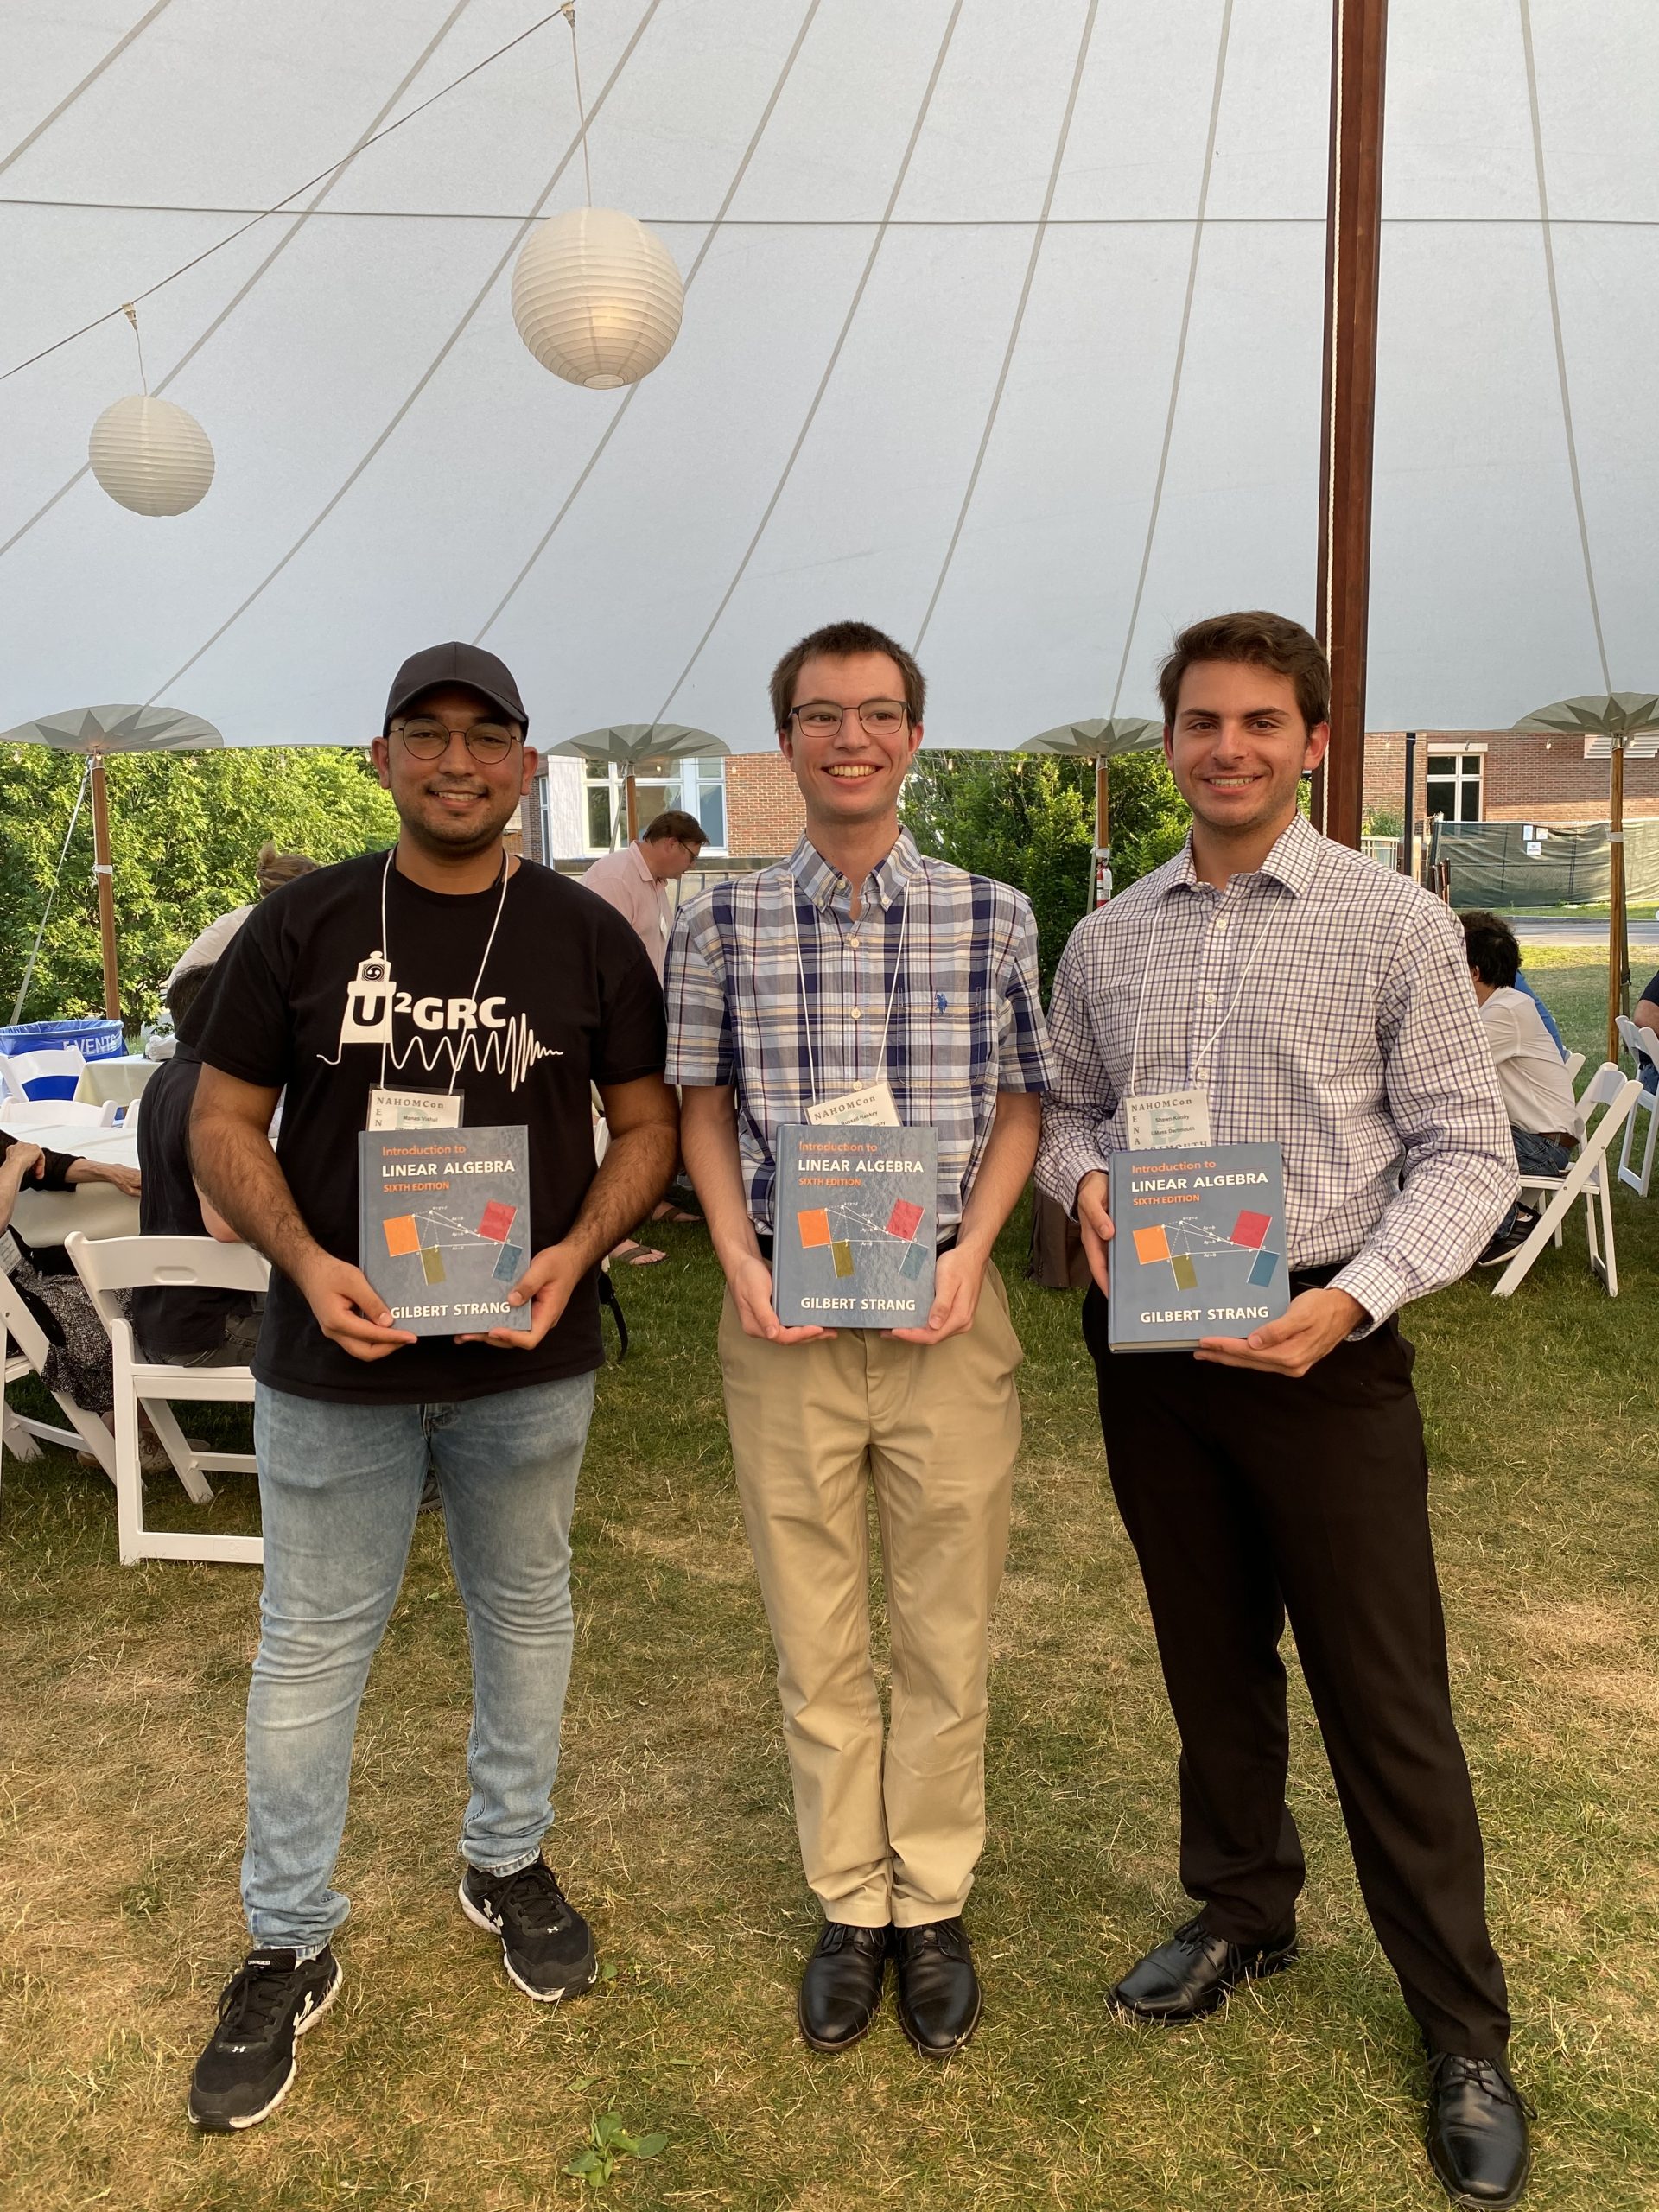 Three men pose with copies of a linear algebra book under an outdoor tent.